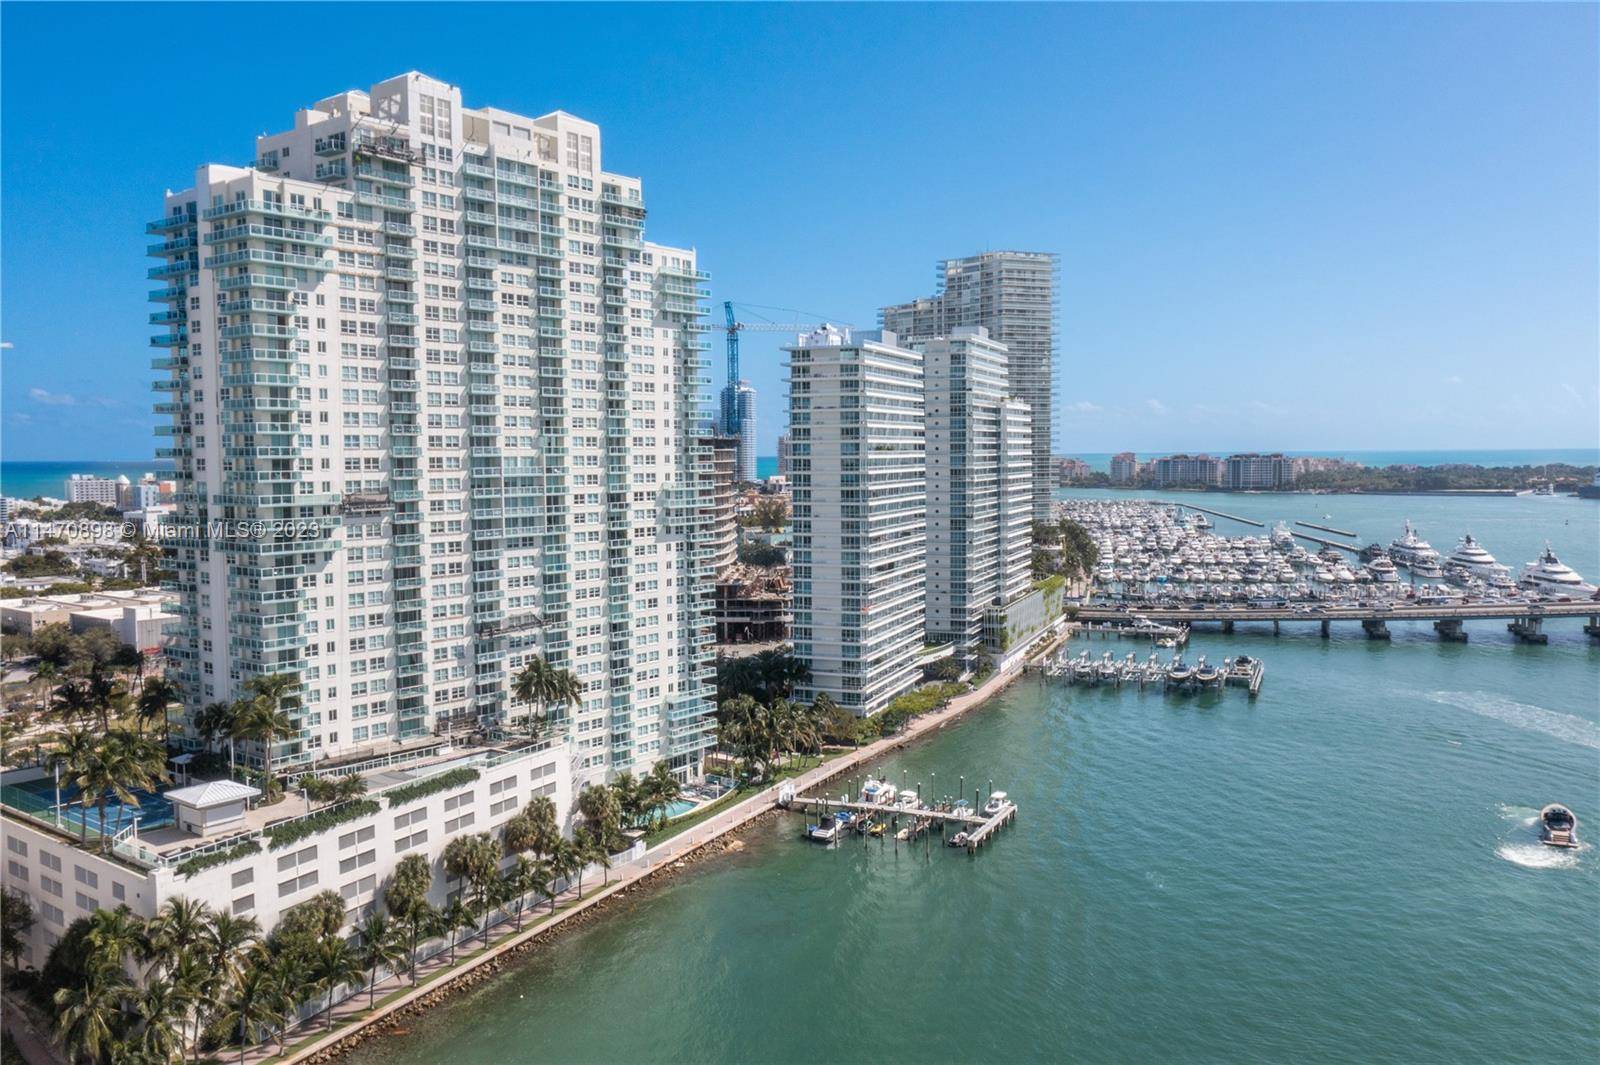 The Floridian is a luxurious landmark condo located in the heart of Miami Beach, offering exceptional amenities such as two pool areas, a gymnasium, tennis courts, bay access, salon, and ...